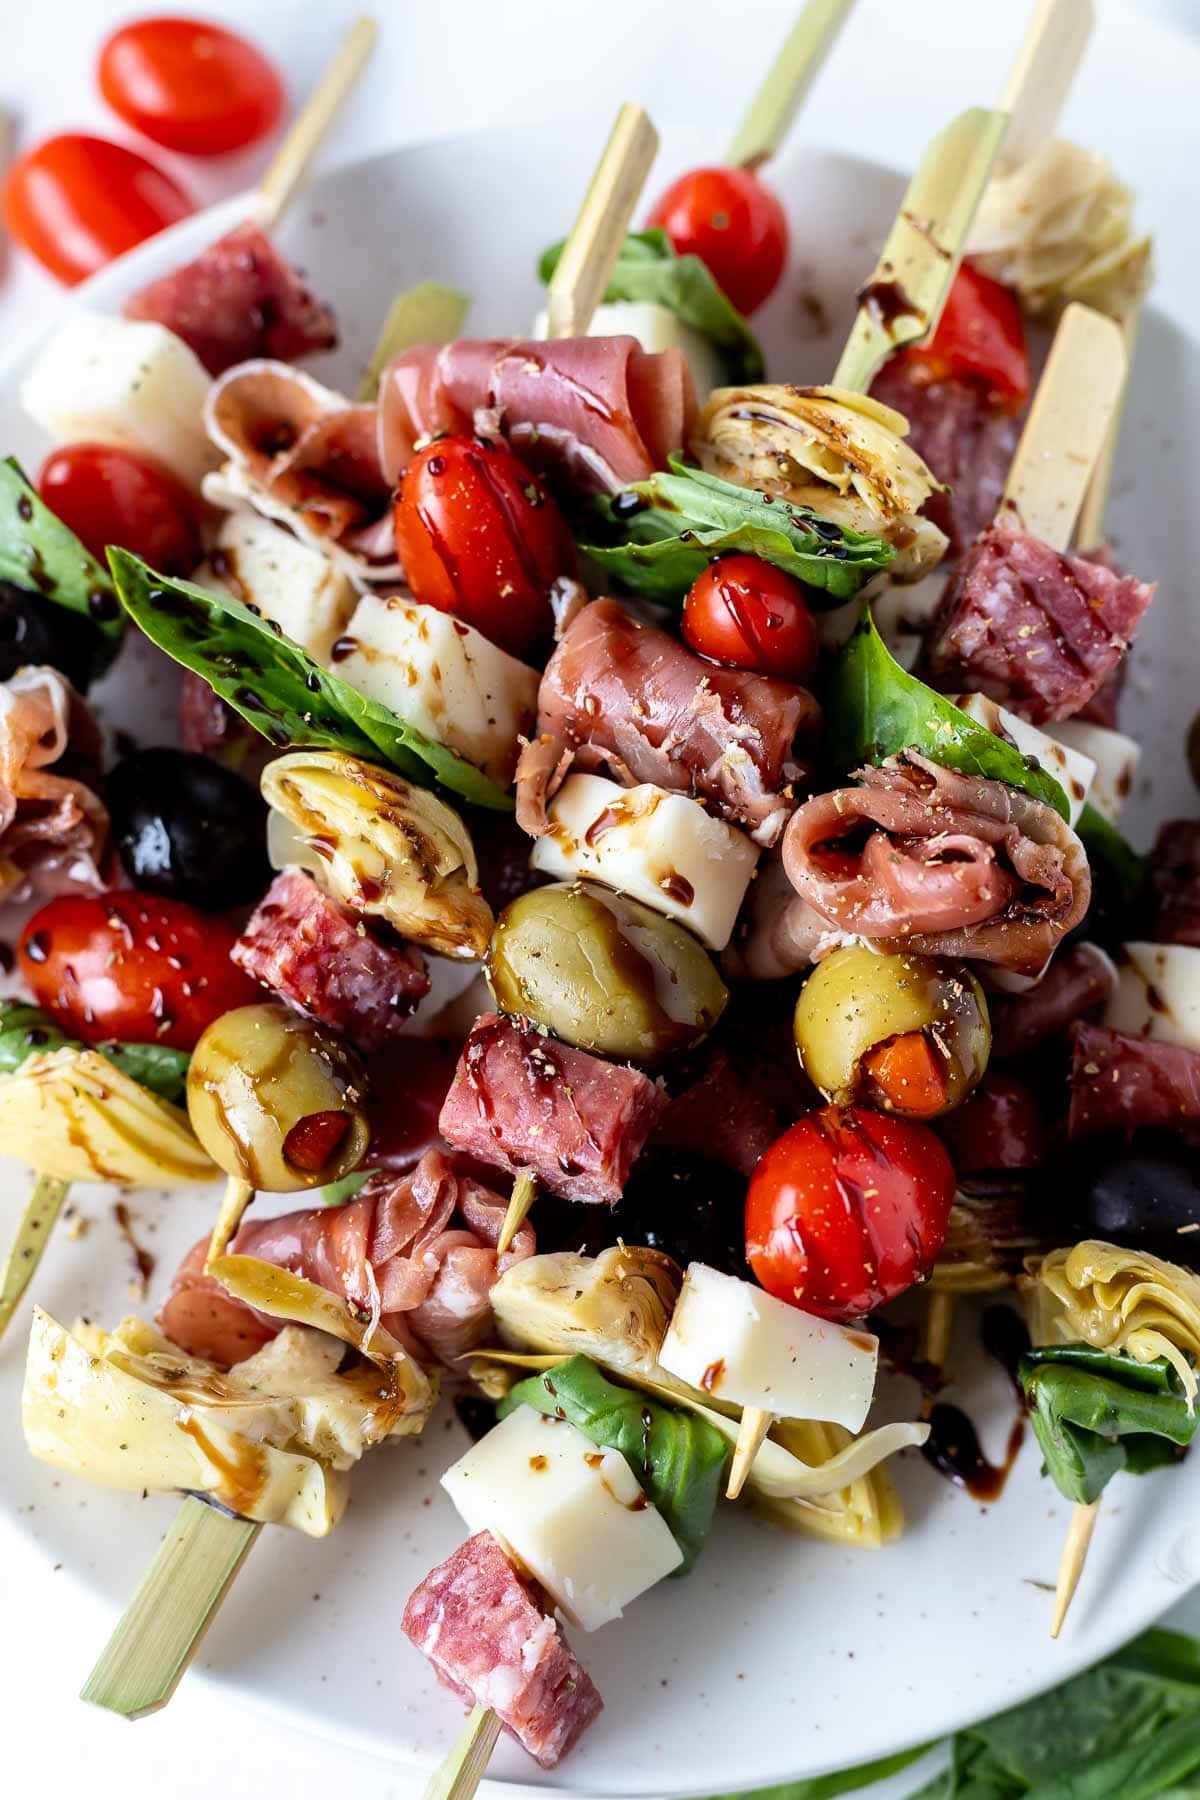 Antipasto skewers with olives, meat, and cheese on stick. 